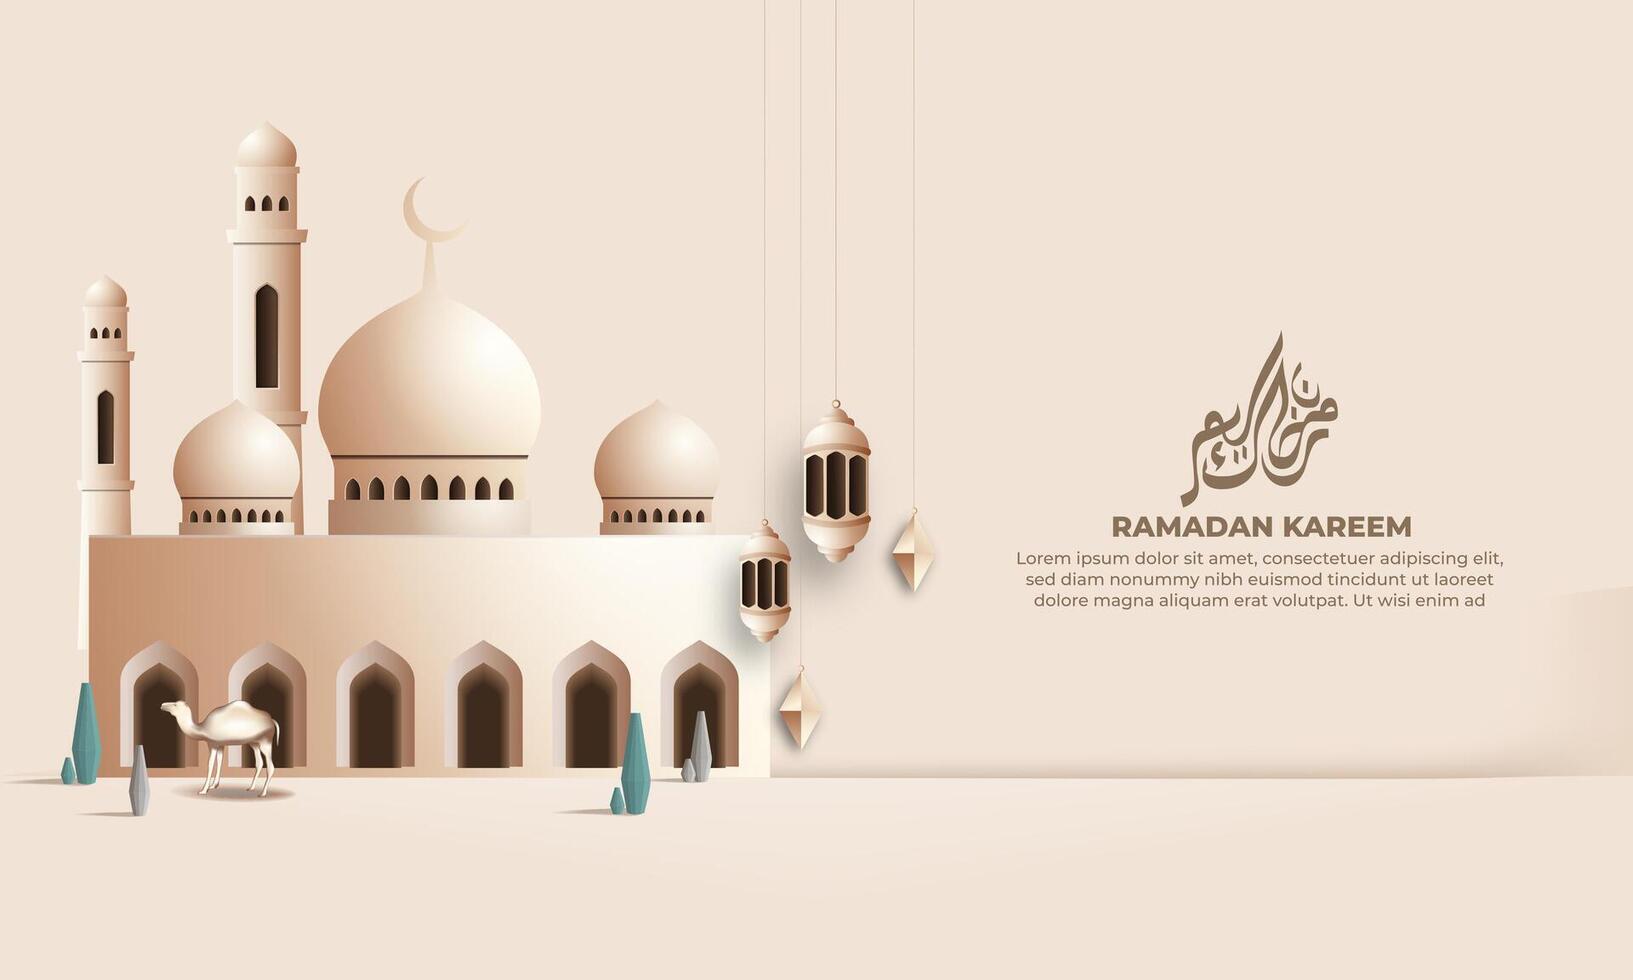 Realistic ramadan background with mosque, lantern,  for banner, greeting card vector